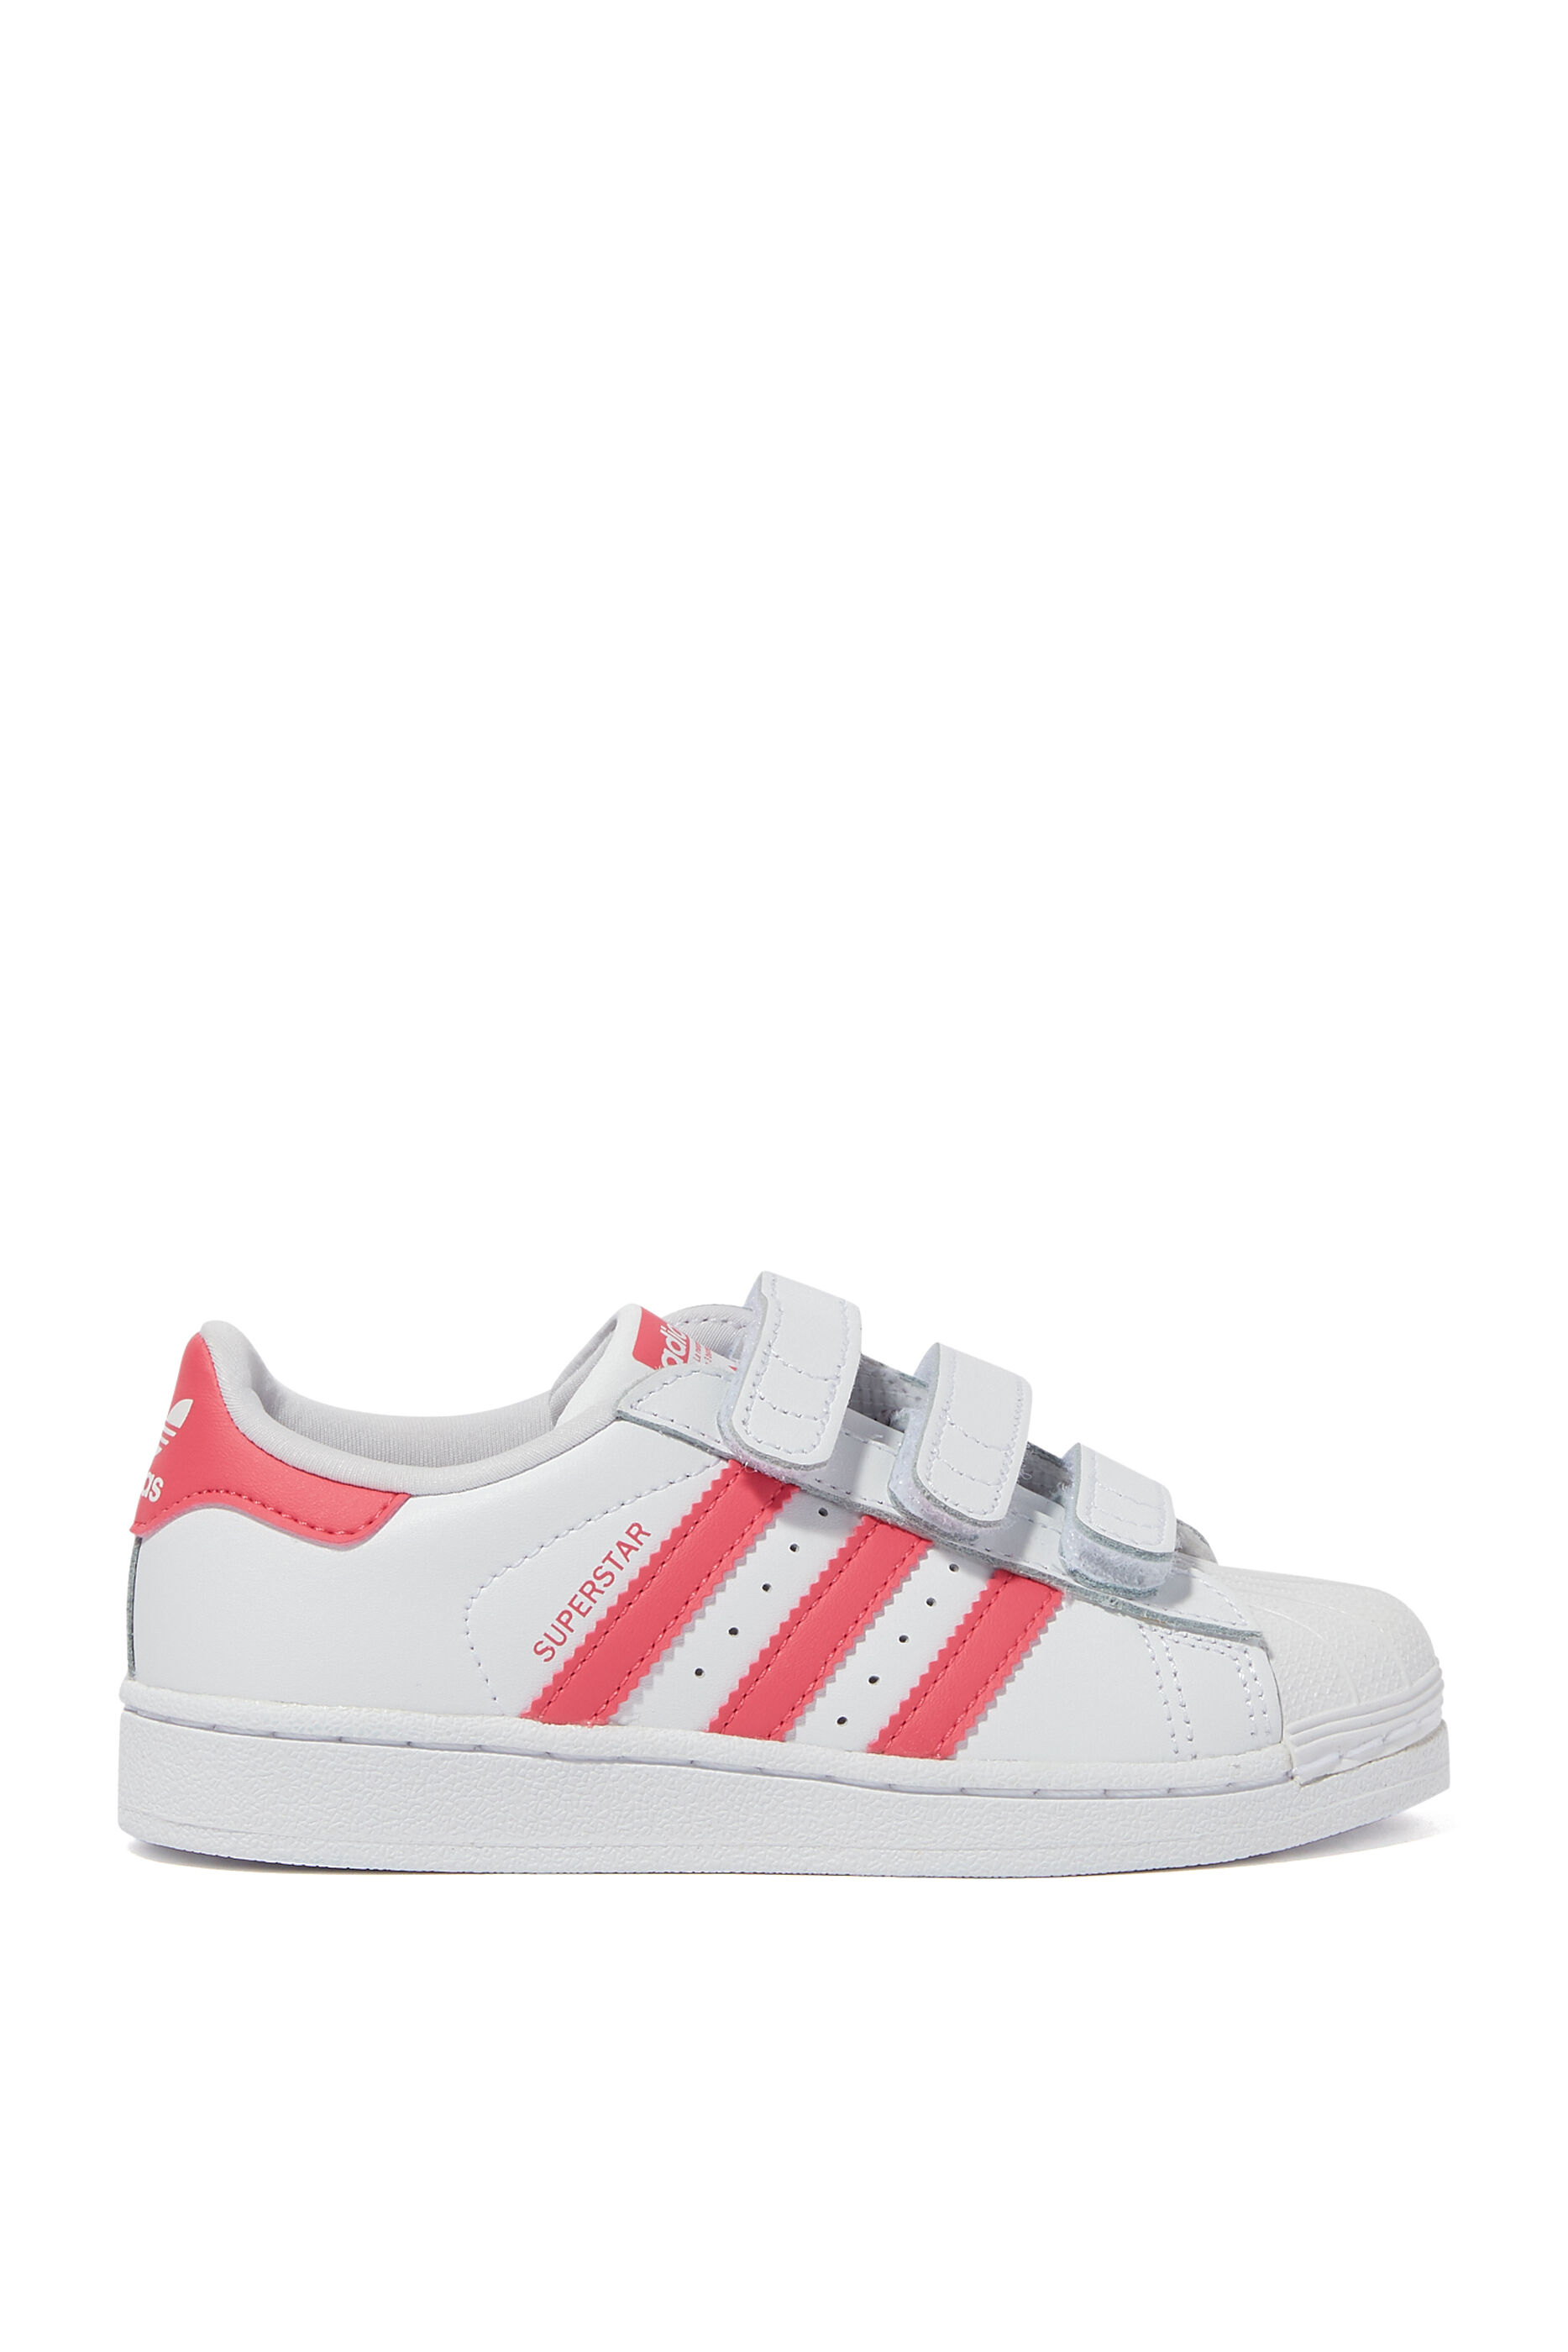 adidas shoes with pink stripes